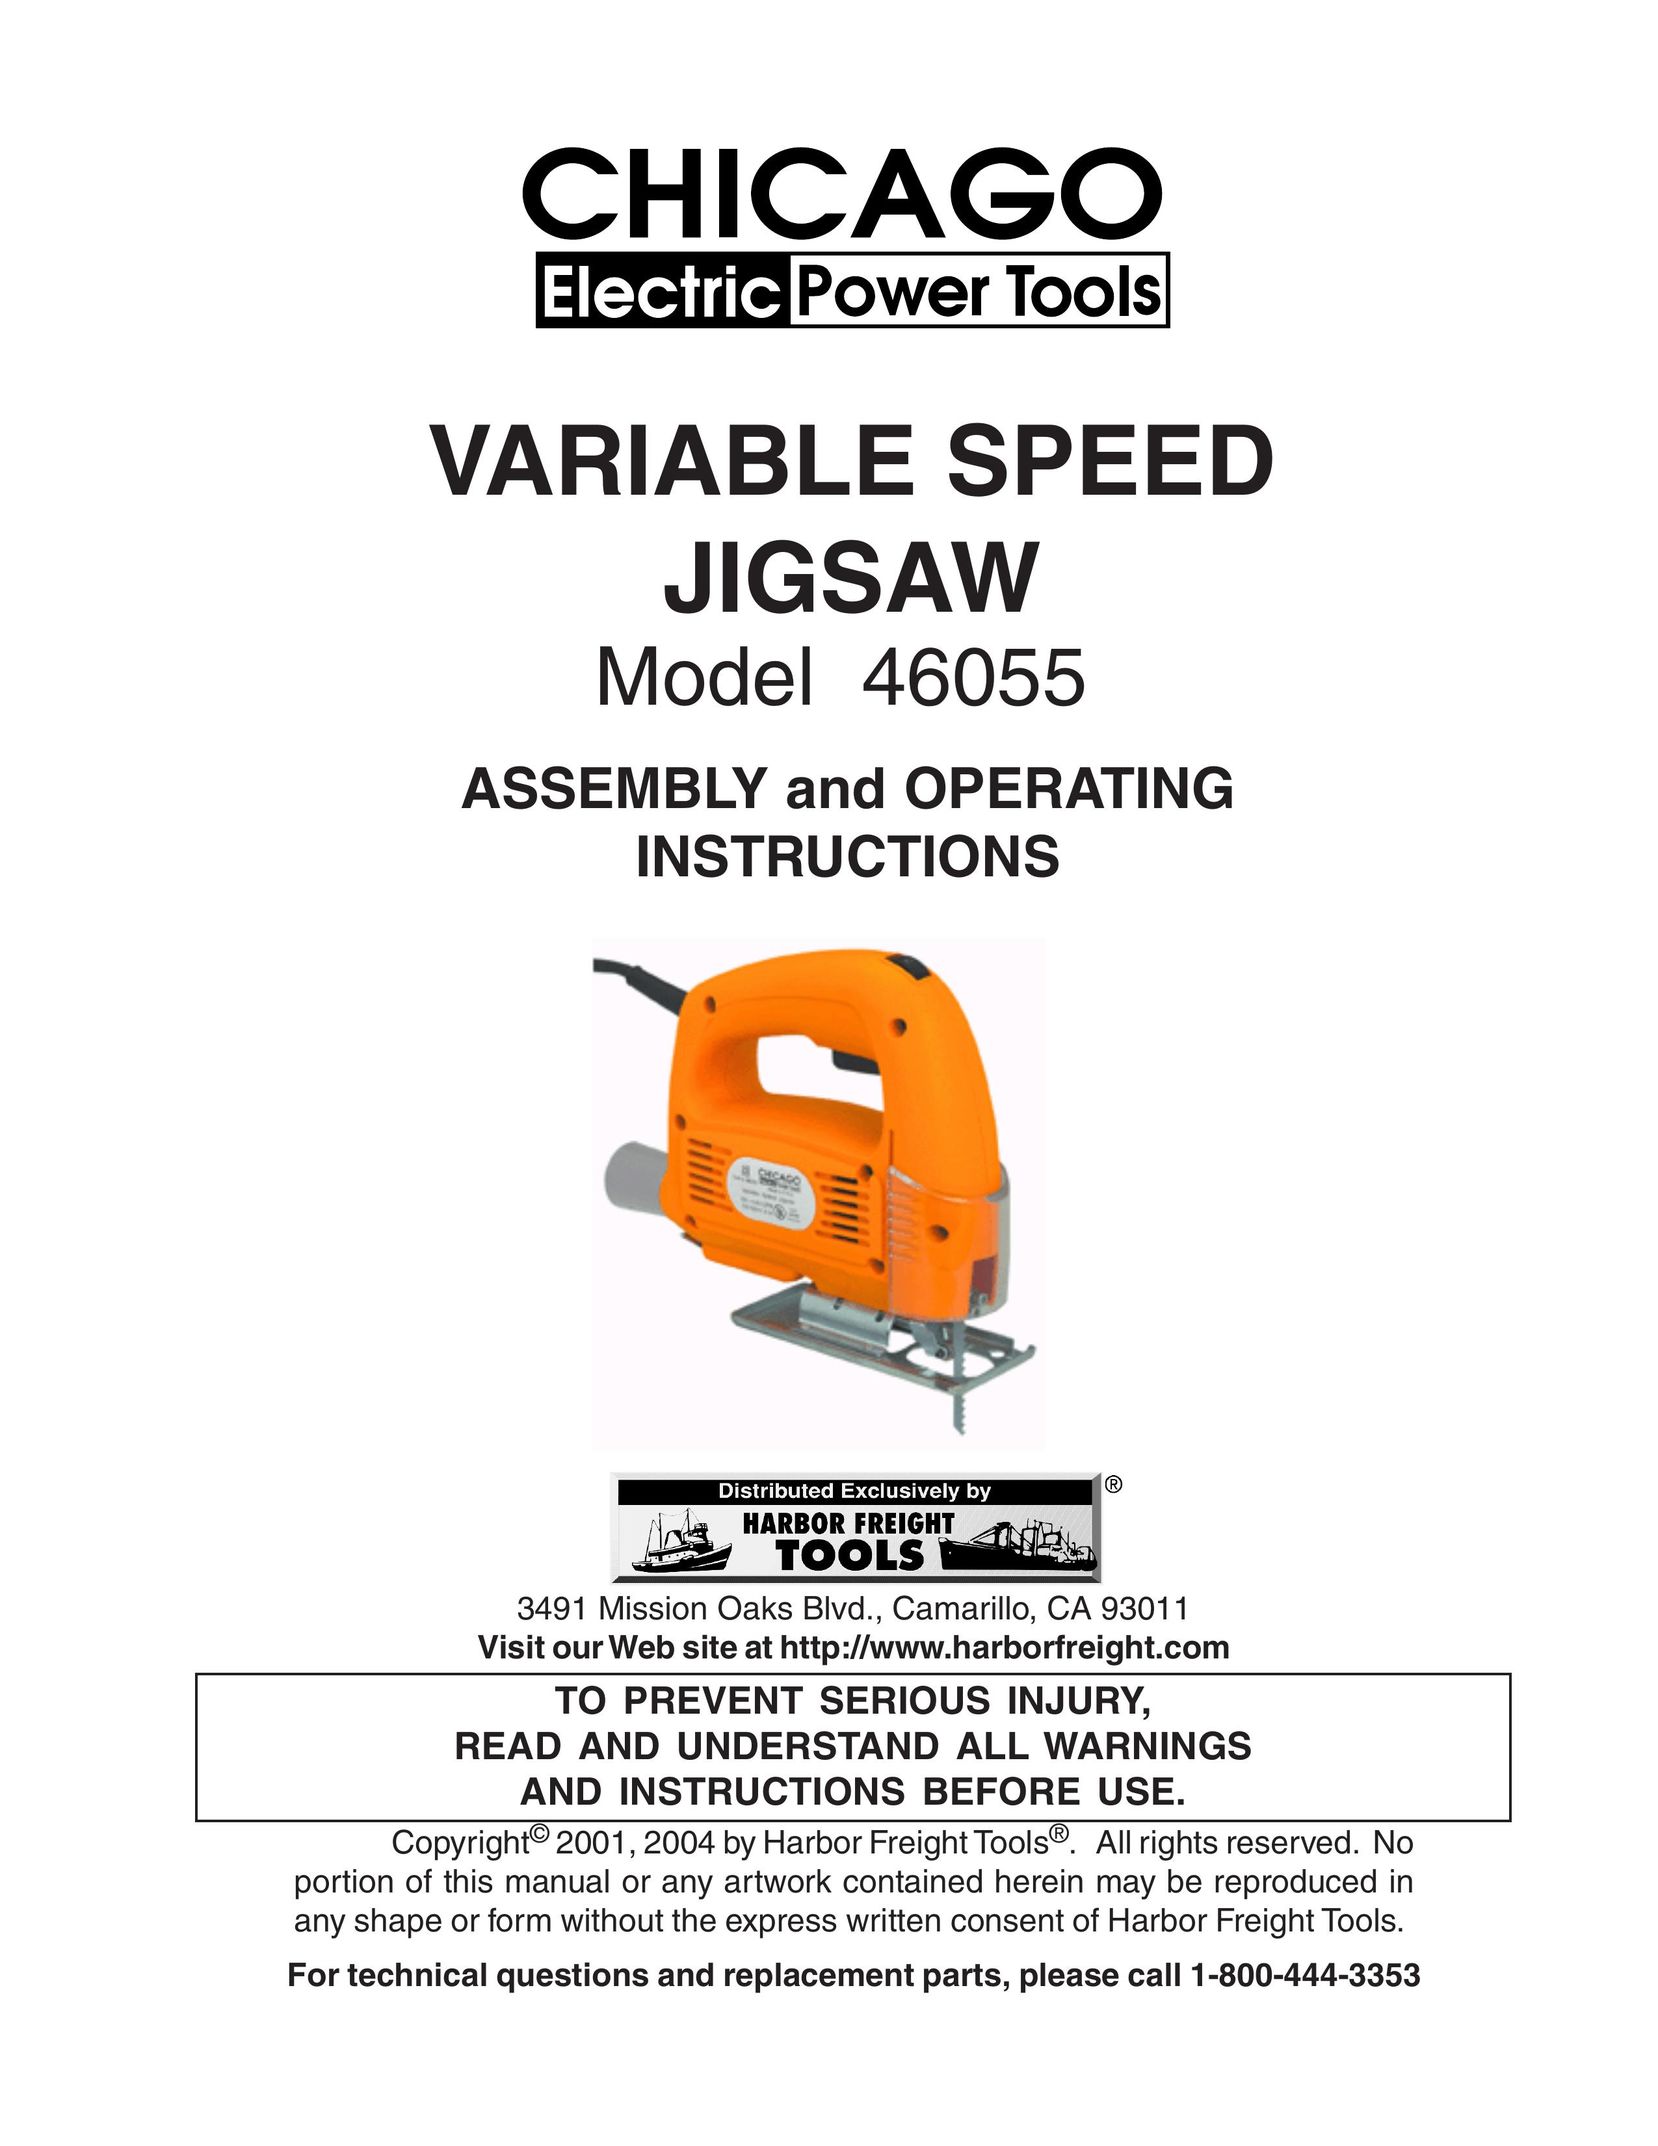 Harbor Freight Tools 46055 Saw User Manual